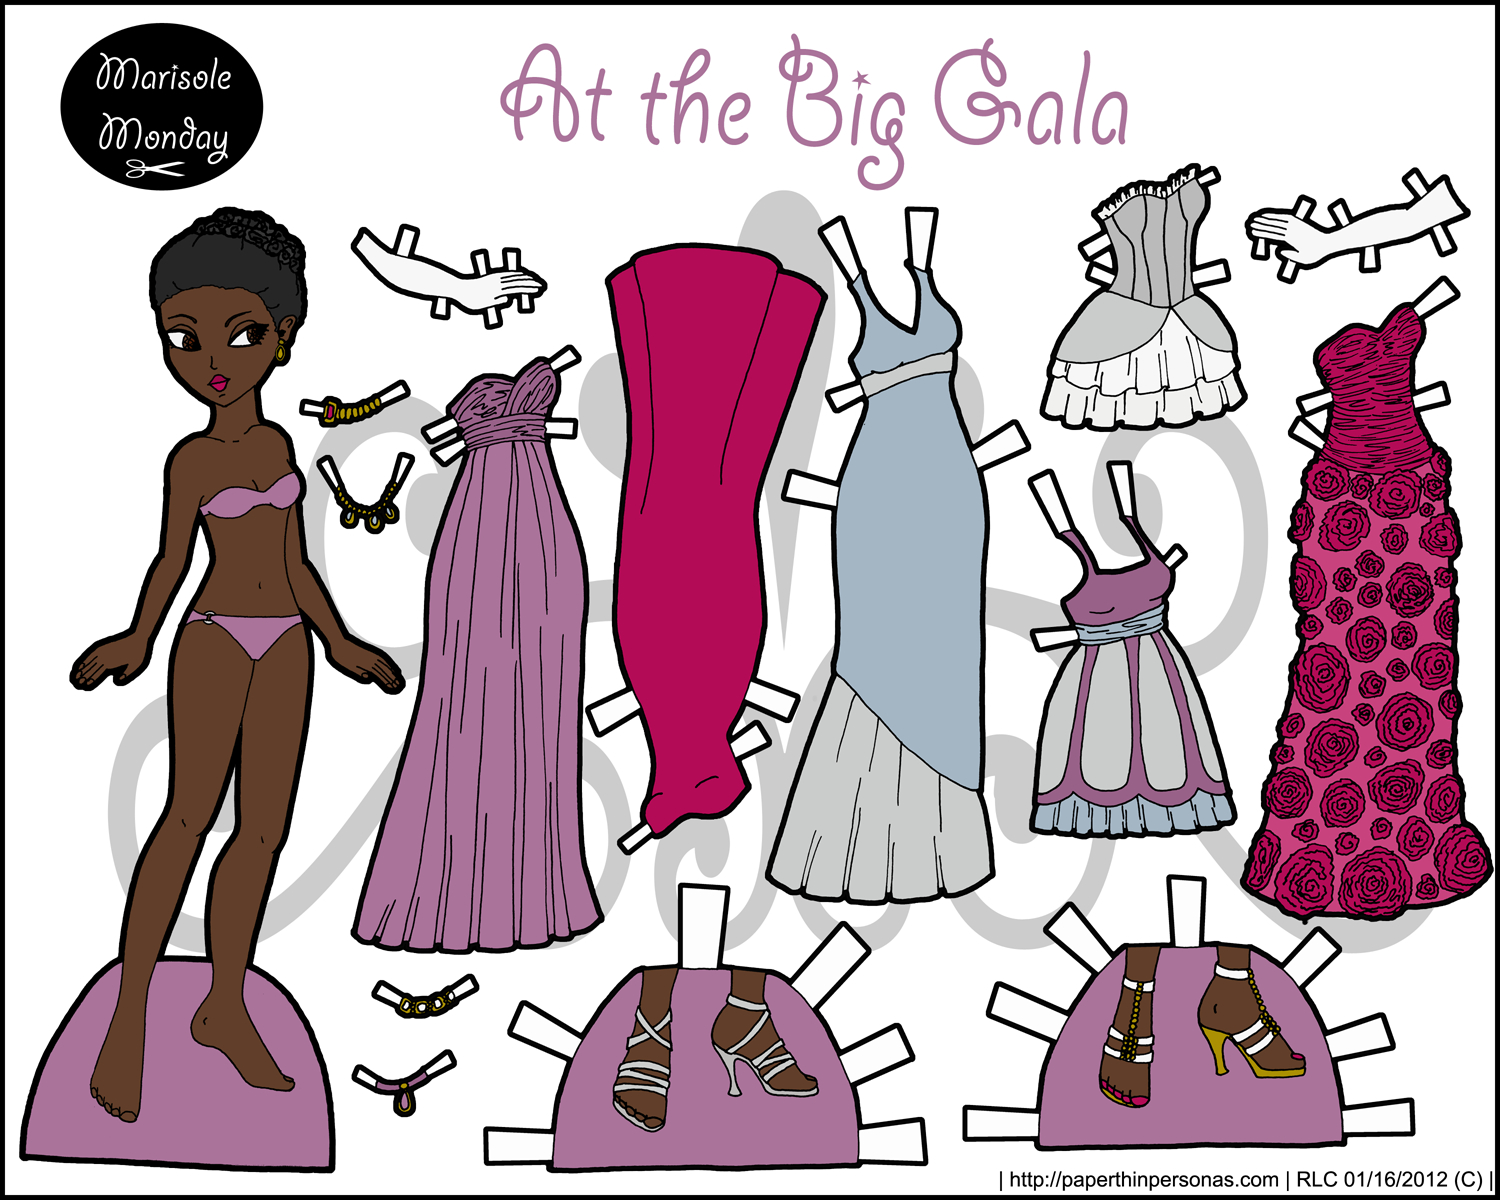 Free Printable Paper Doll- Marisole Monday - Free Printable Paper Dolls